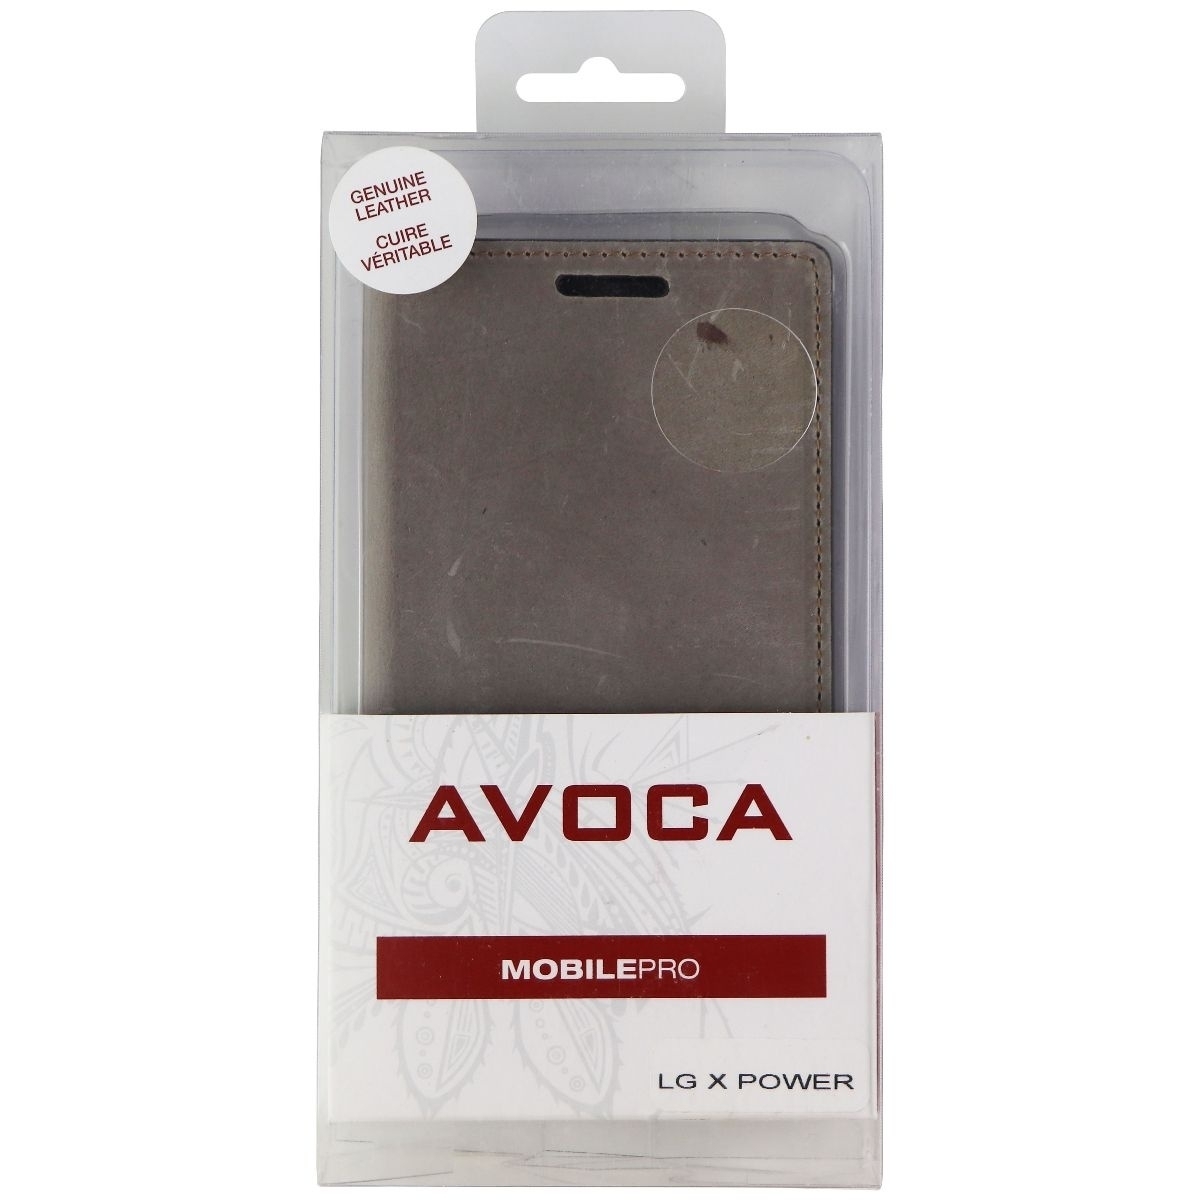 Avoca MobilePro Protective Folio Case For LG X Power (2016 Model) - Brown